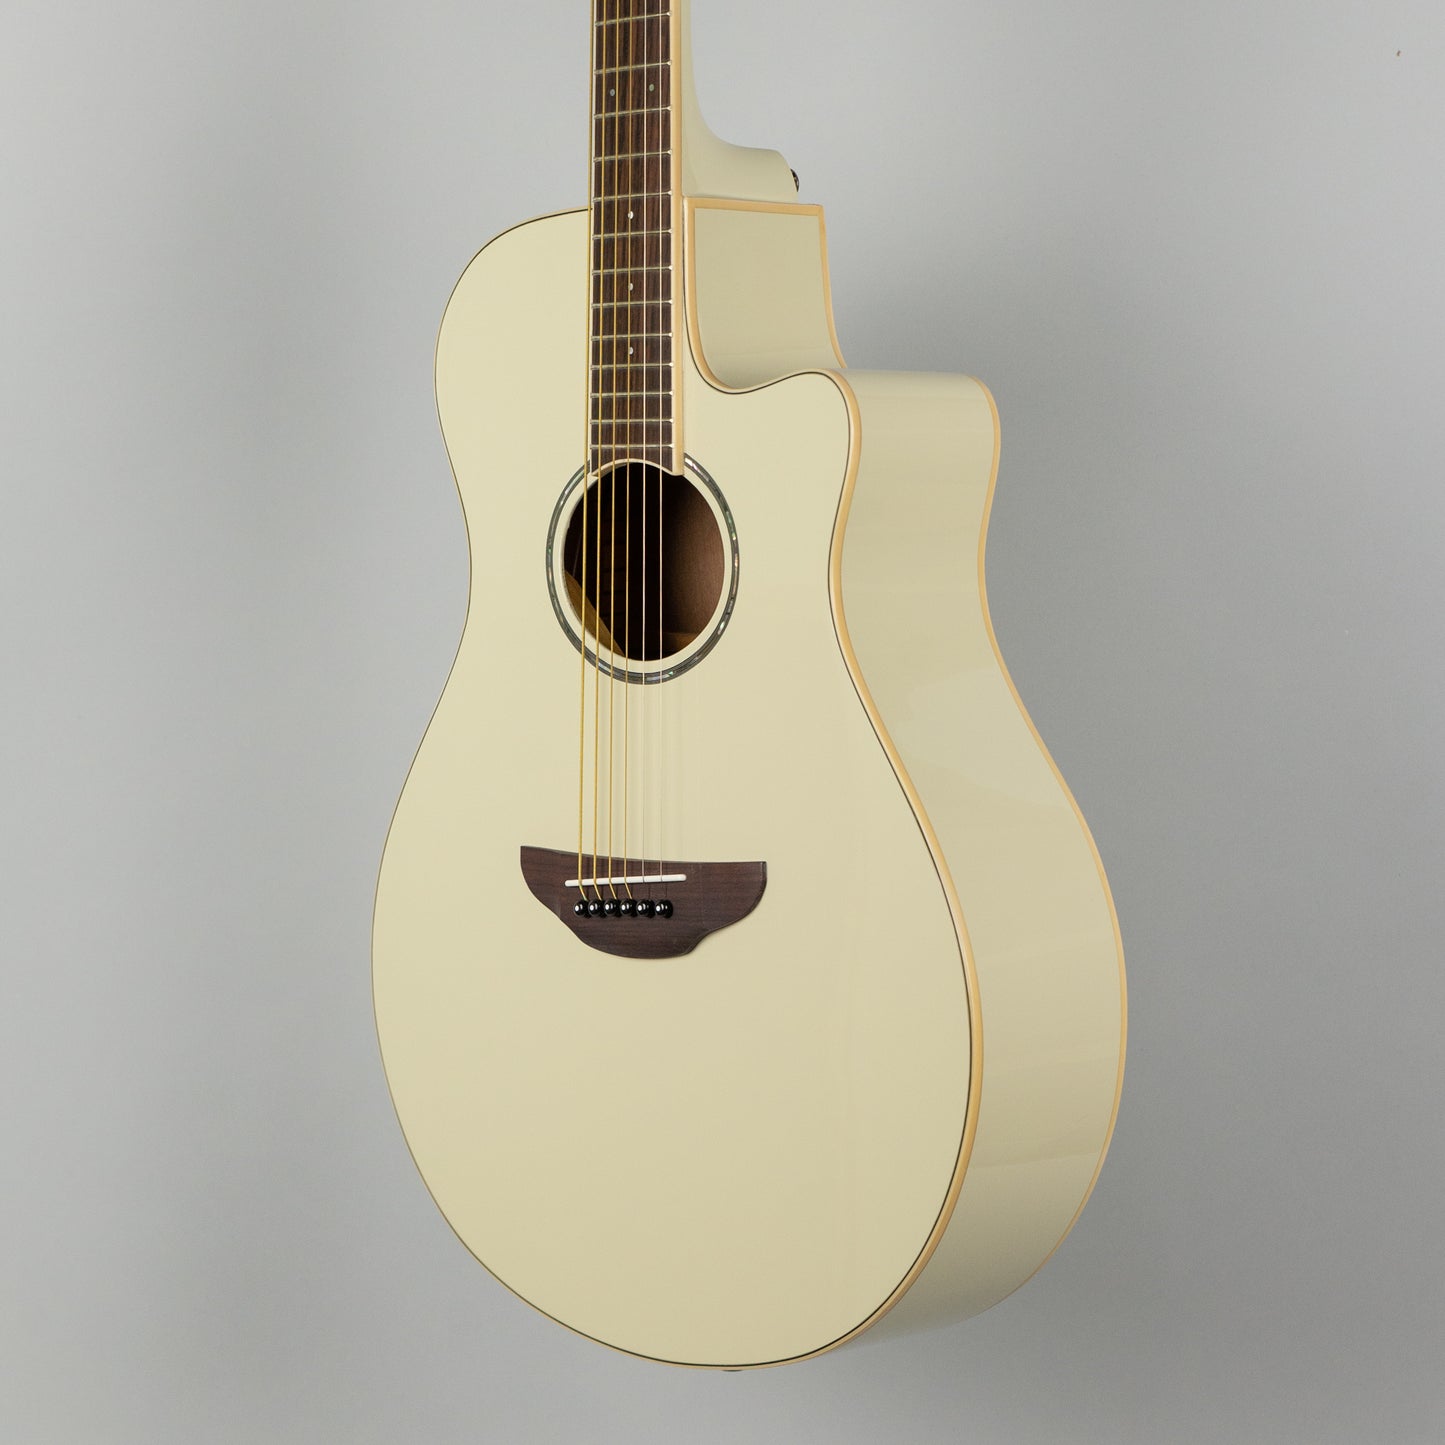 Yamaha APX600 Acoustic Electric Guitar Vintage White